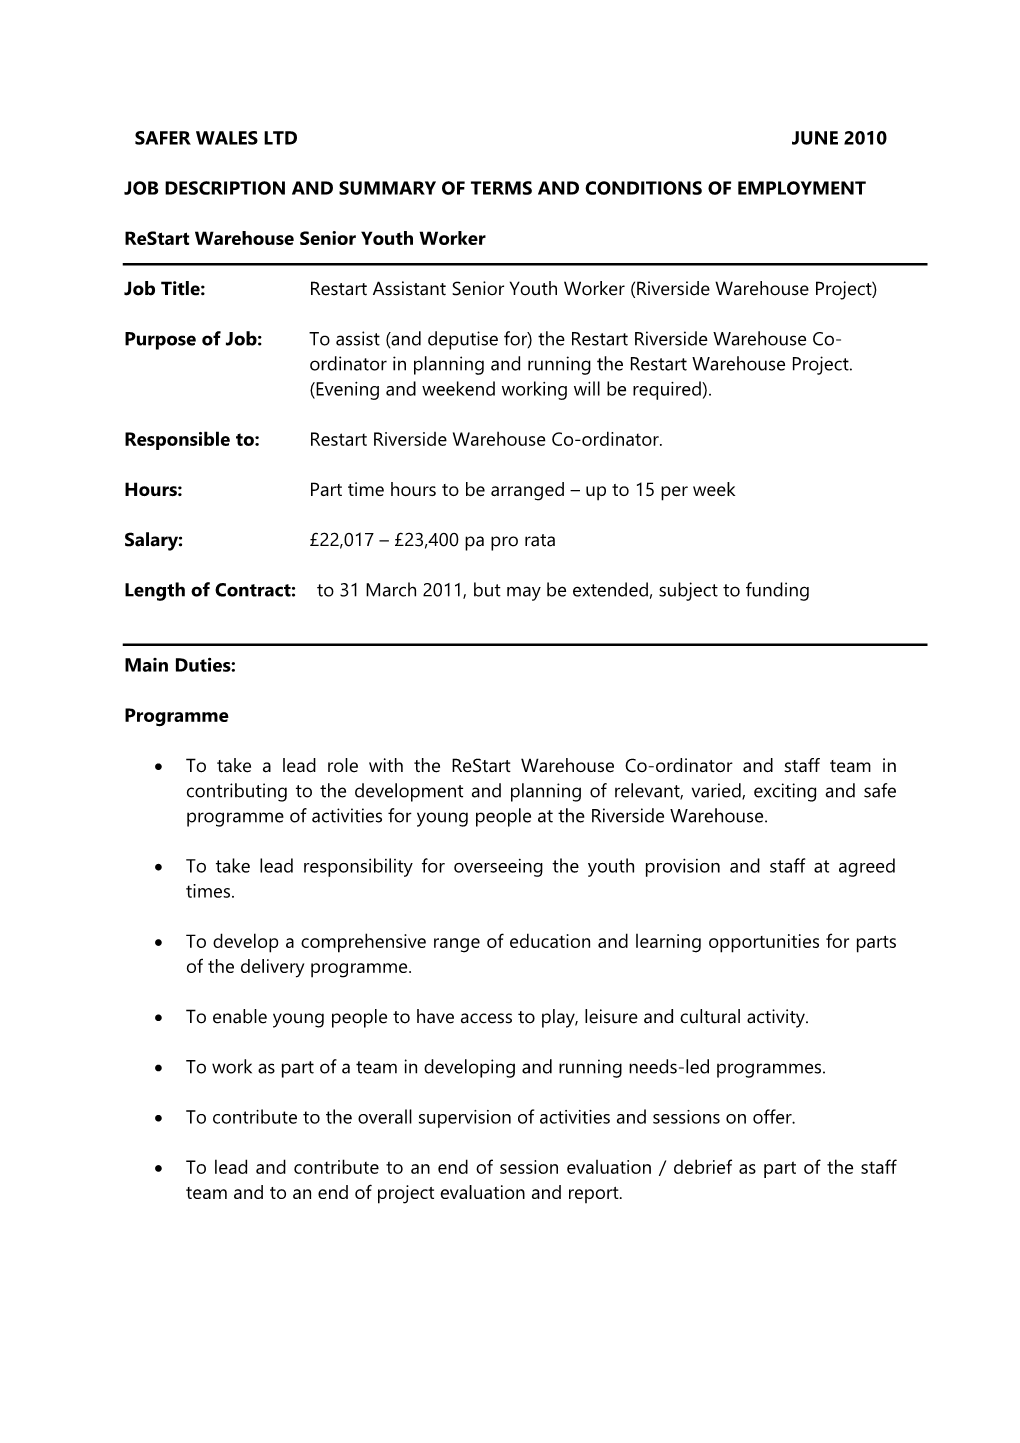 Temporary Staff Contract